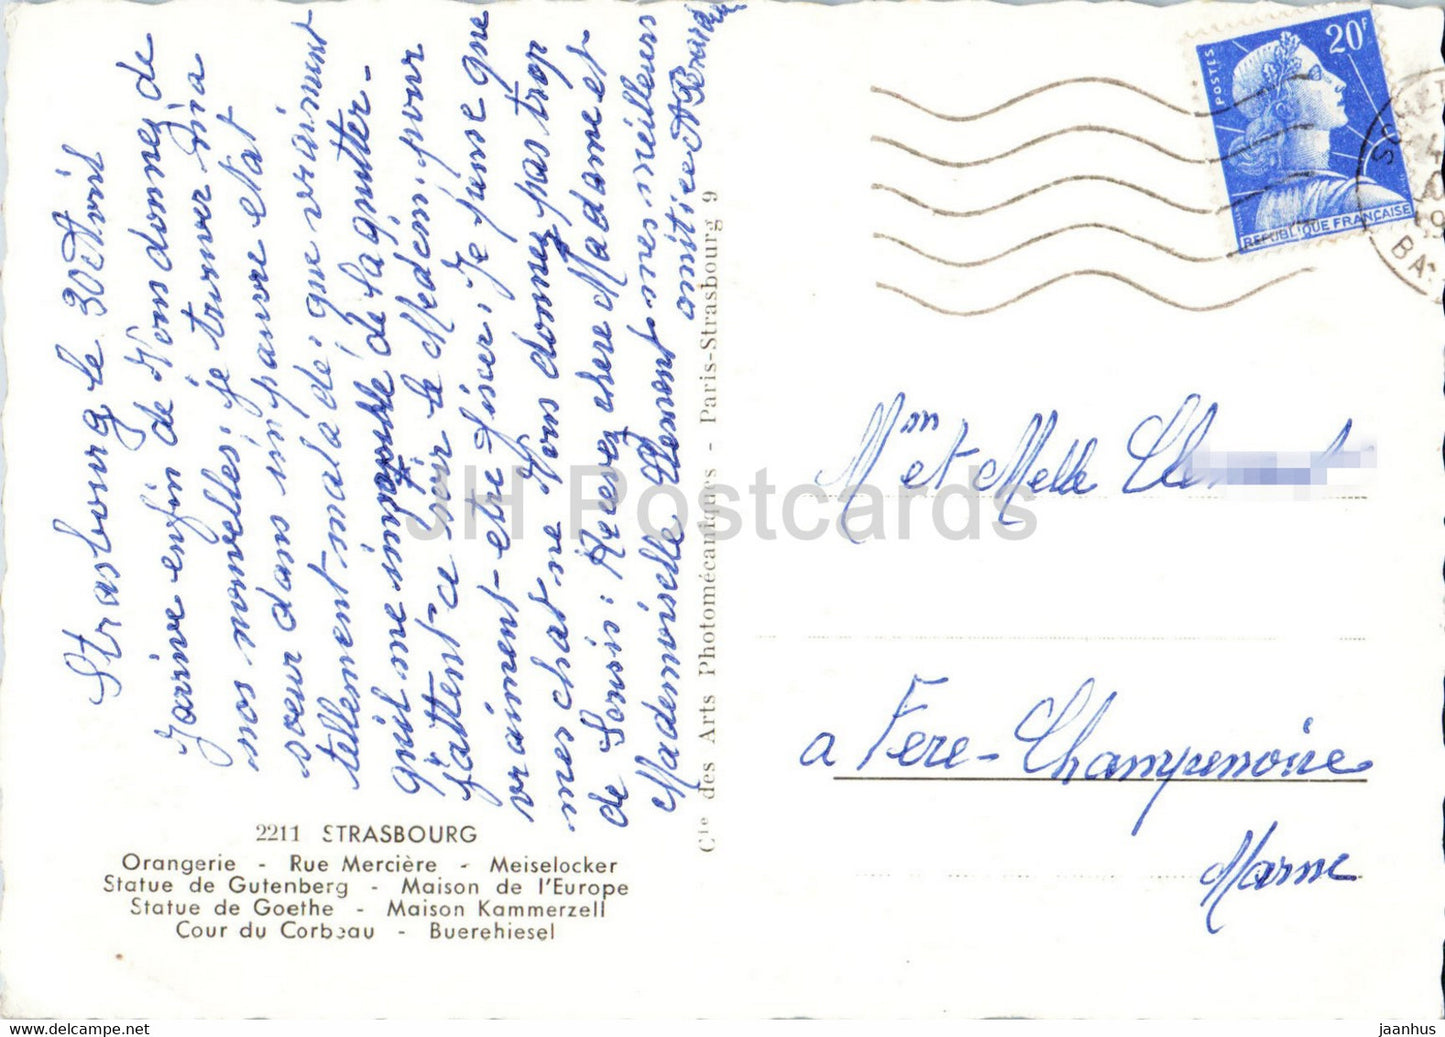 Strasbourg - multiview - 2211 - France - occasion